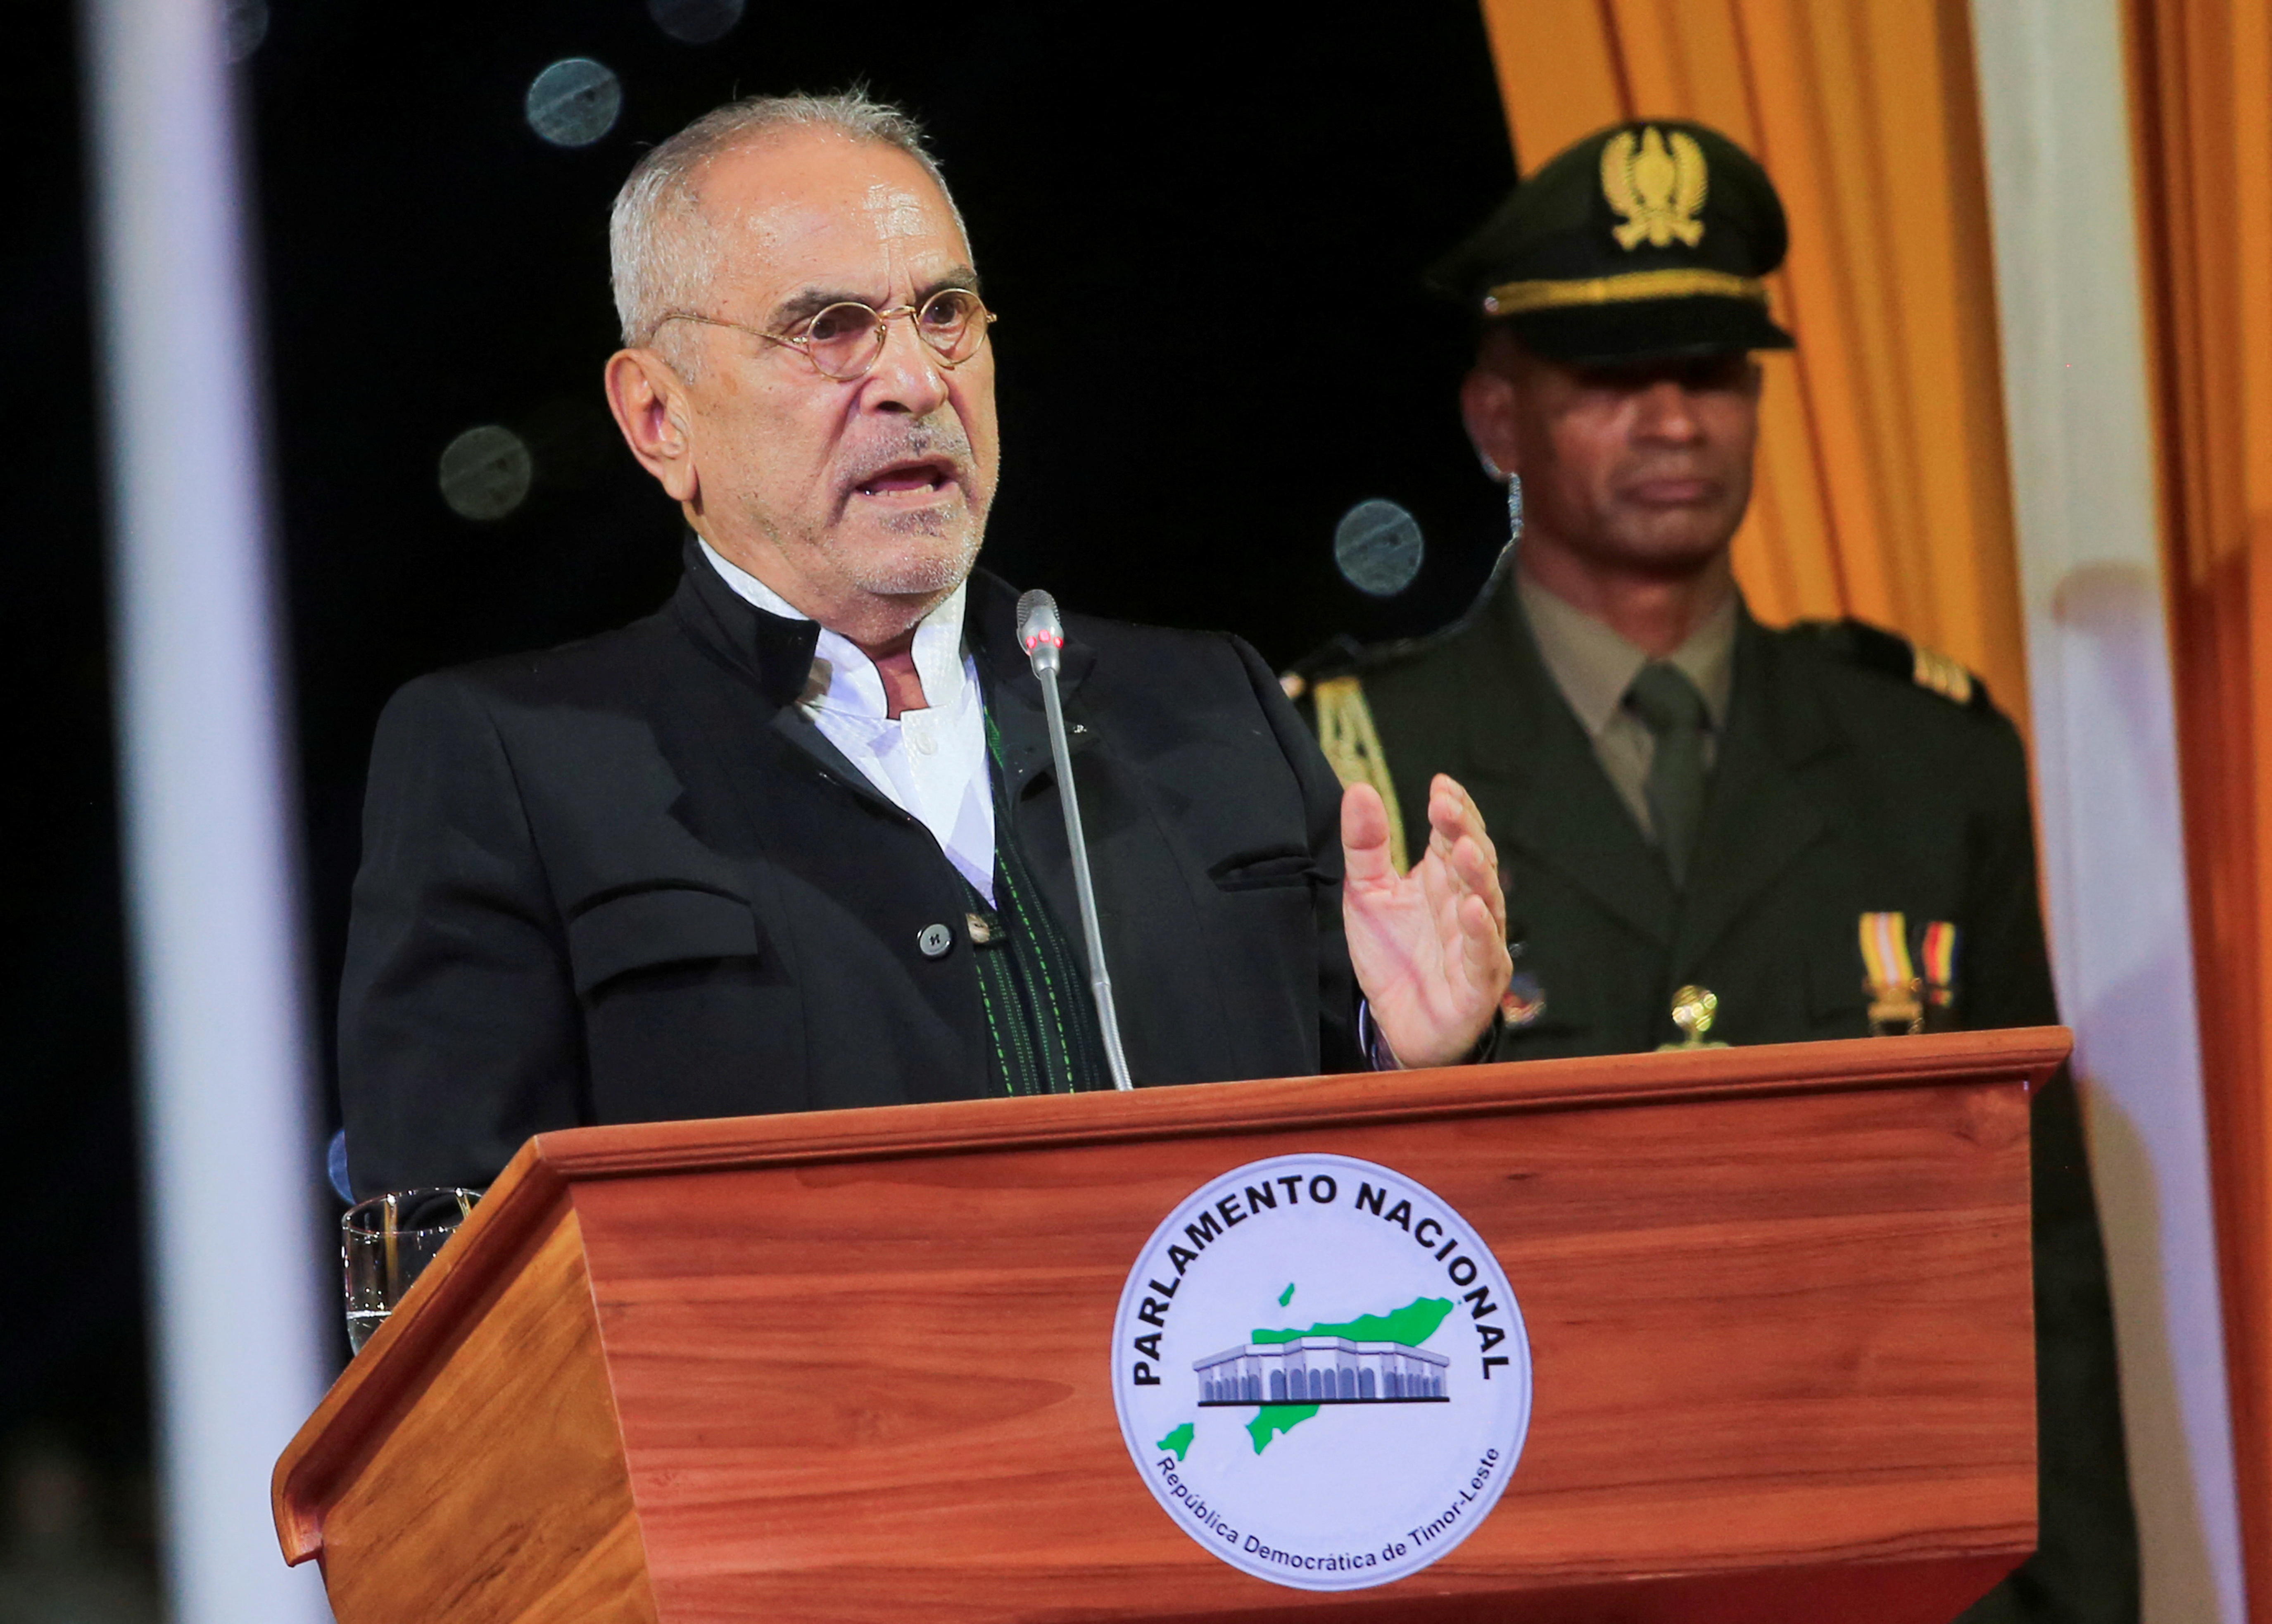 Nobel laureate Jose Ramos Horta, the new-elected President of East Timor, delivers his speech after taking his oath during the swearing ceremony in Dili,